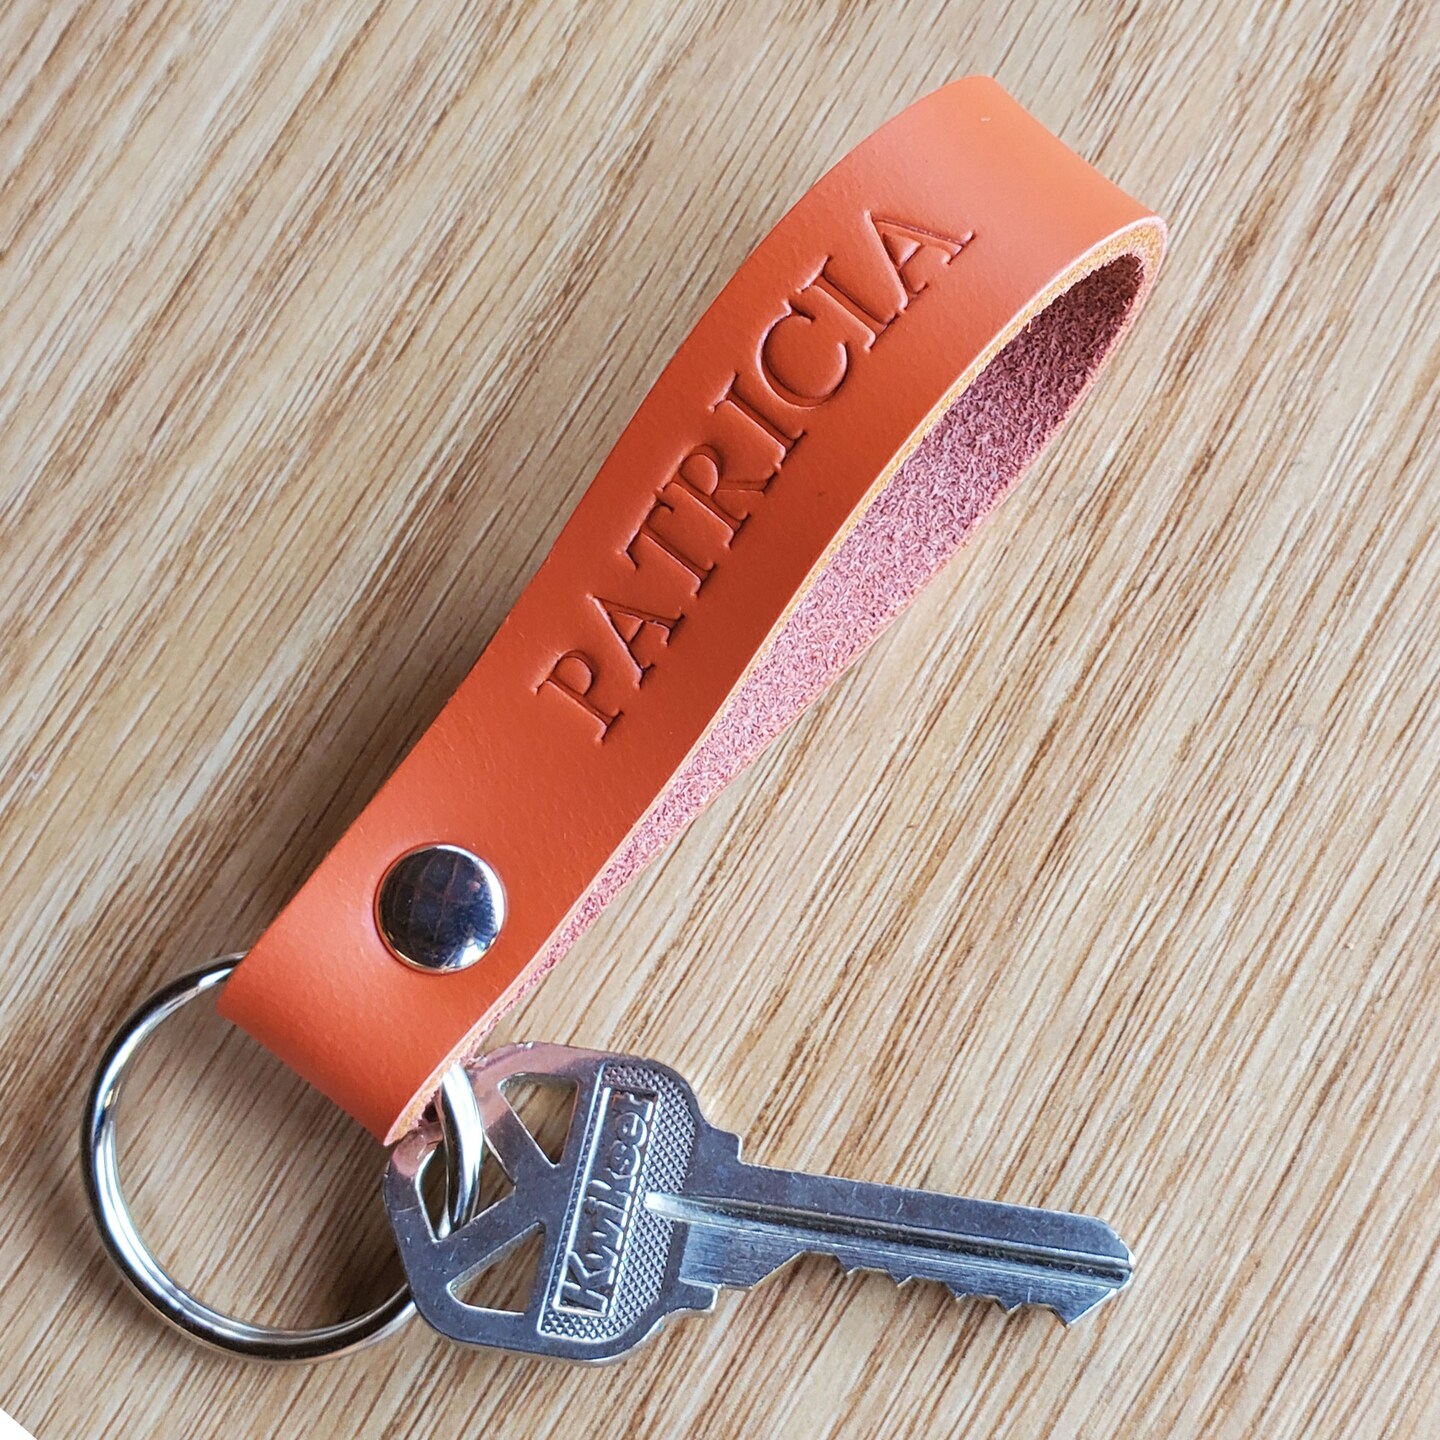 12 Pack Leather Keychains-Laser engraving, Hot foil stamping, Promotional Gifts, Fundraising Event